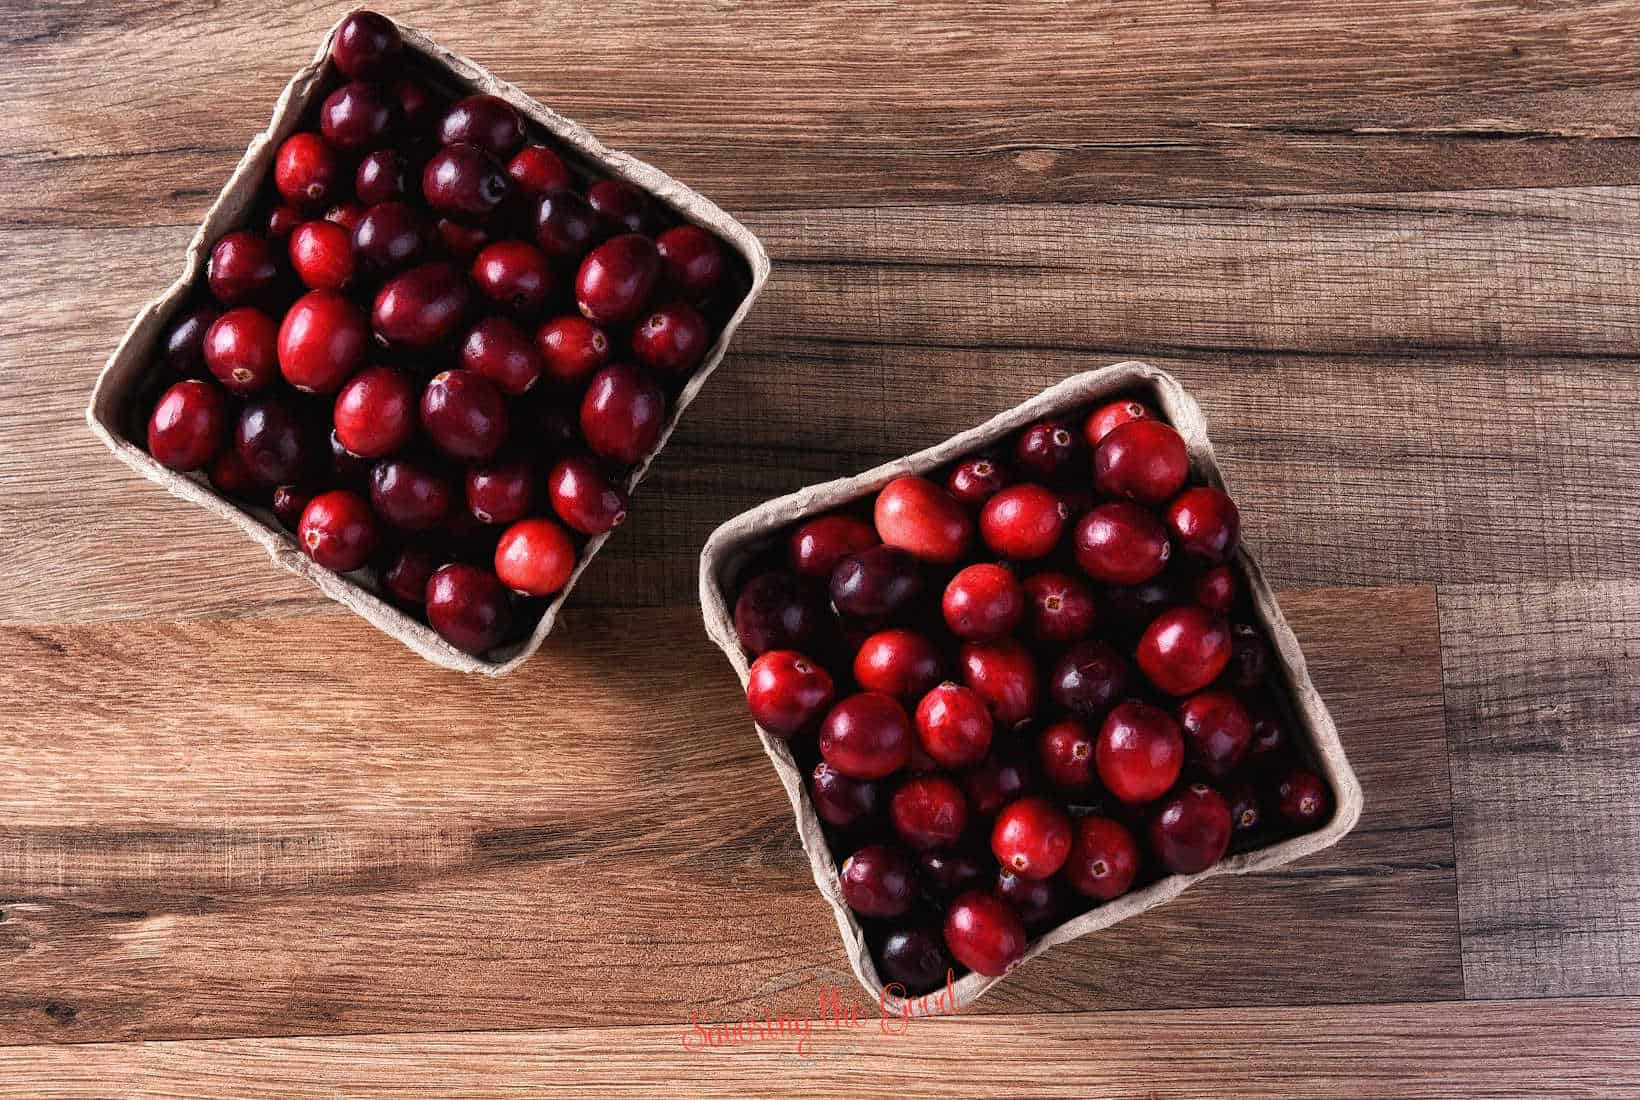 Two baskets of cranberries on a wooden table.